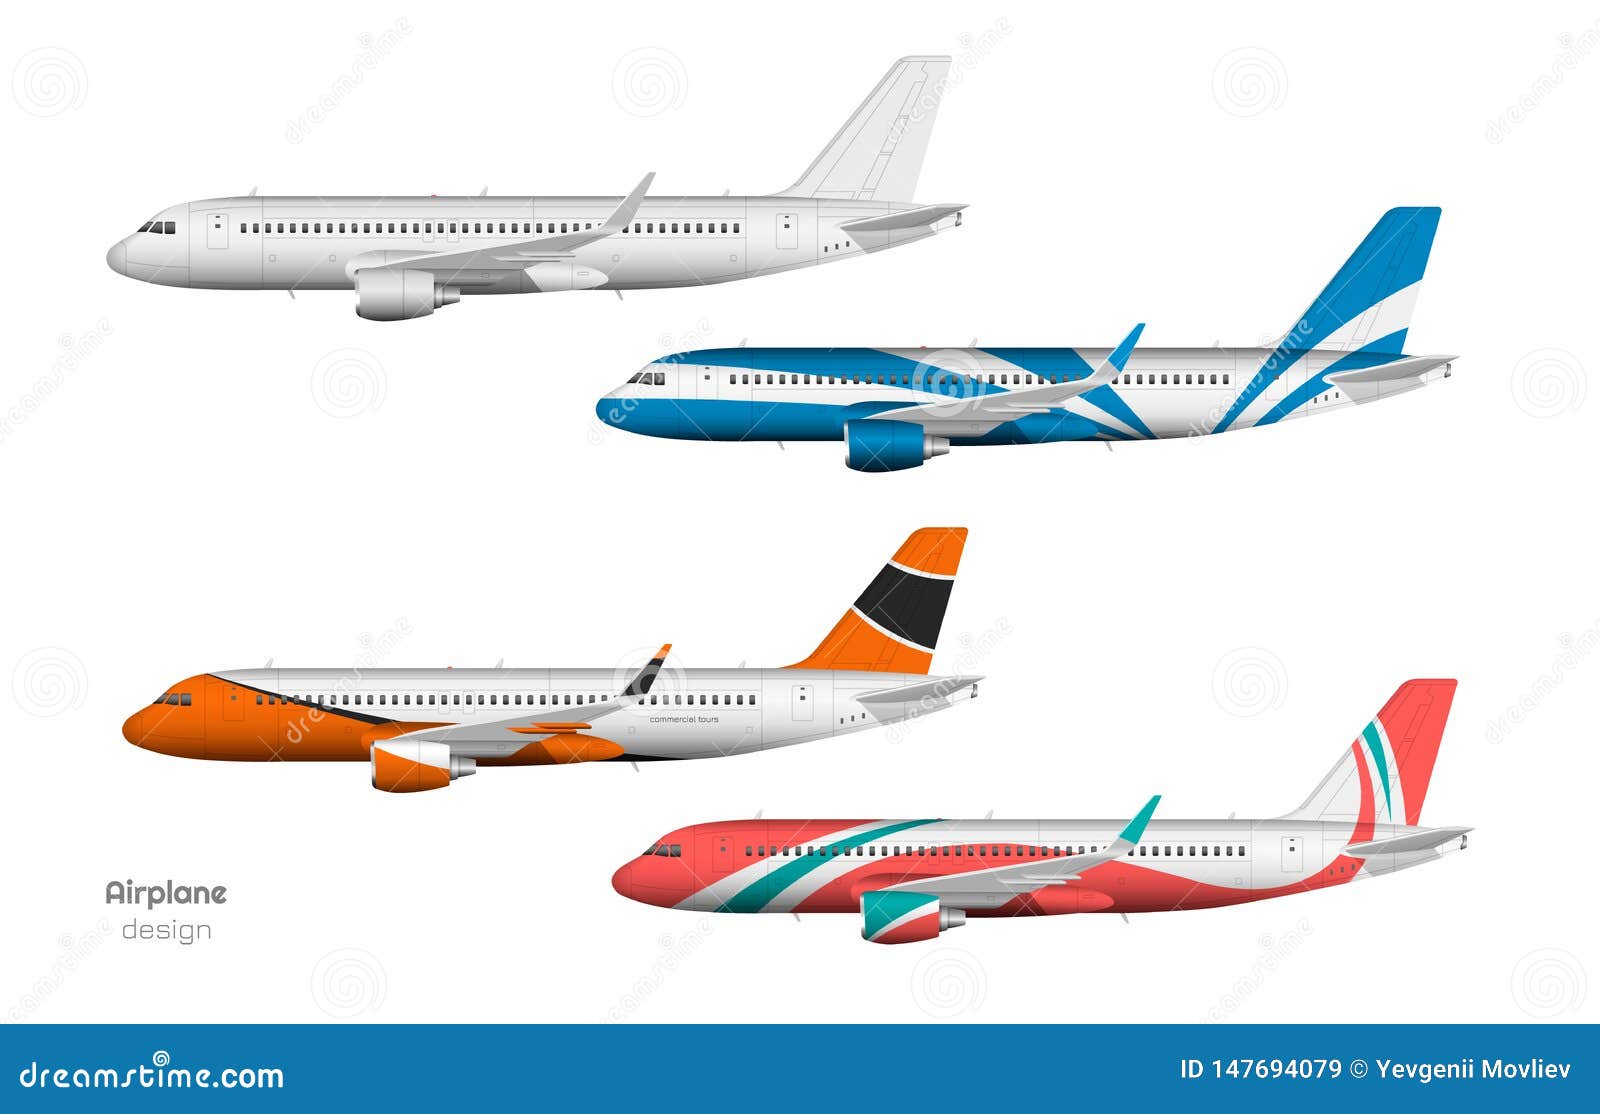 Download Airplane Design Side View Of Plane Aircraft 3d Template Jet Mockup In Realistic Style Isolated Industrial Blueprint Stock Vector Illustration Of Commercial Aeroplane 147694079